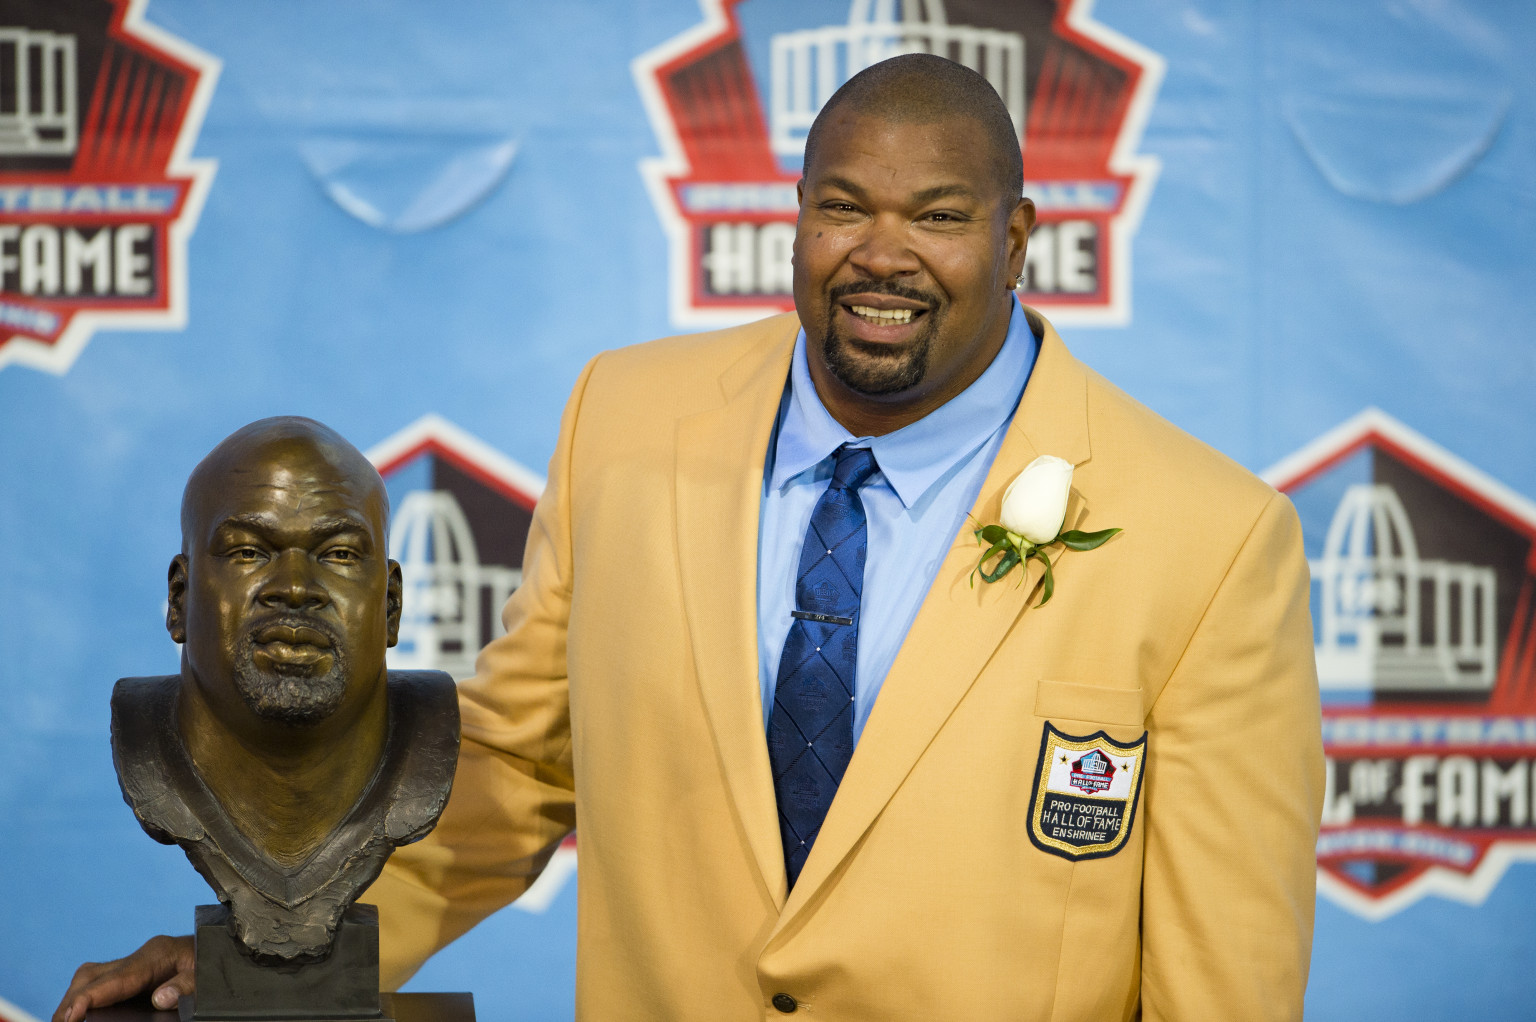 CANTON, OH - AUGUST 3: Former offensive lineman Larry Allen of the Dallas Cowboys poses with his Hall of Fame bust during the NFL Class of 2013 Enshrinement Ceremony at Fawcett Stadium on Aug. 3, 2013 in Canton, Ohio. (Photo by Jason Miller/Getty Images)